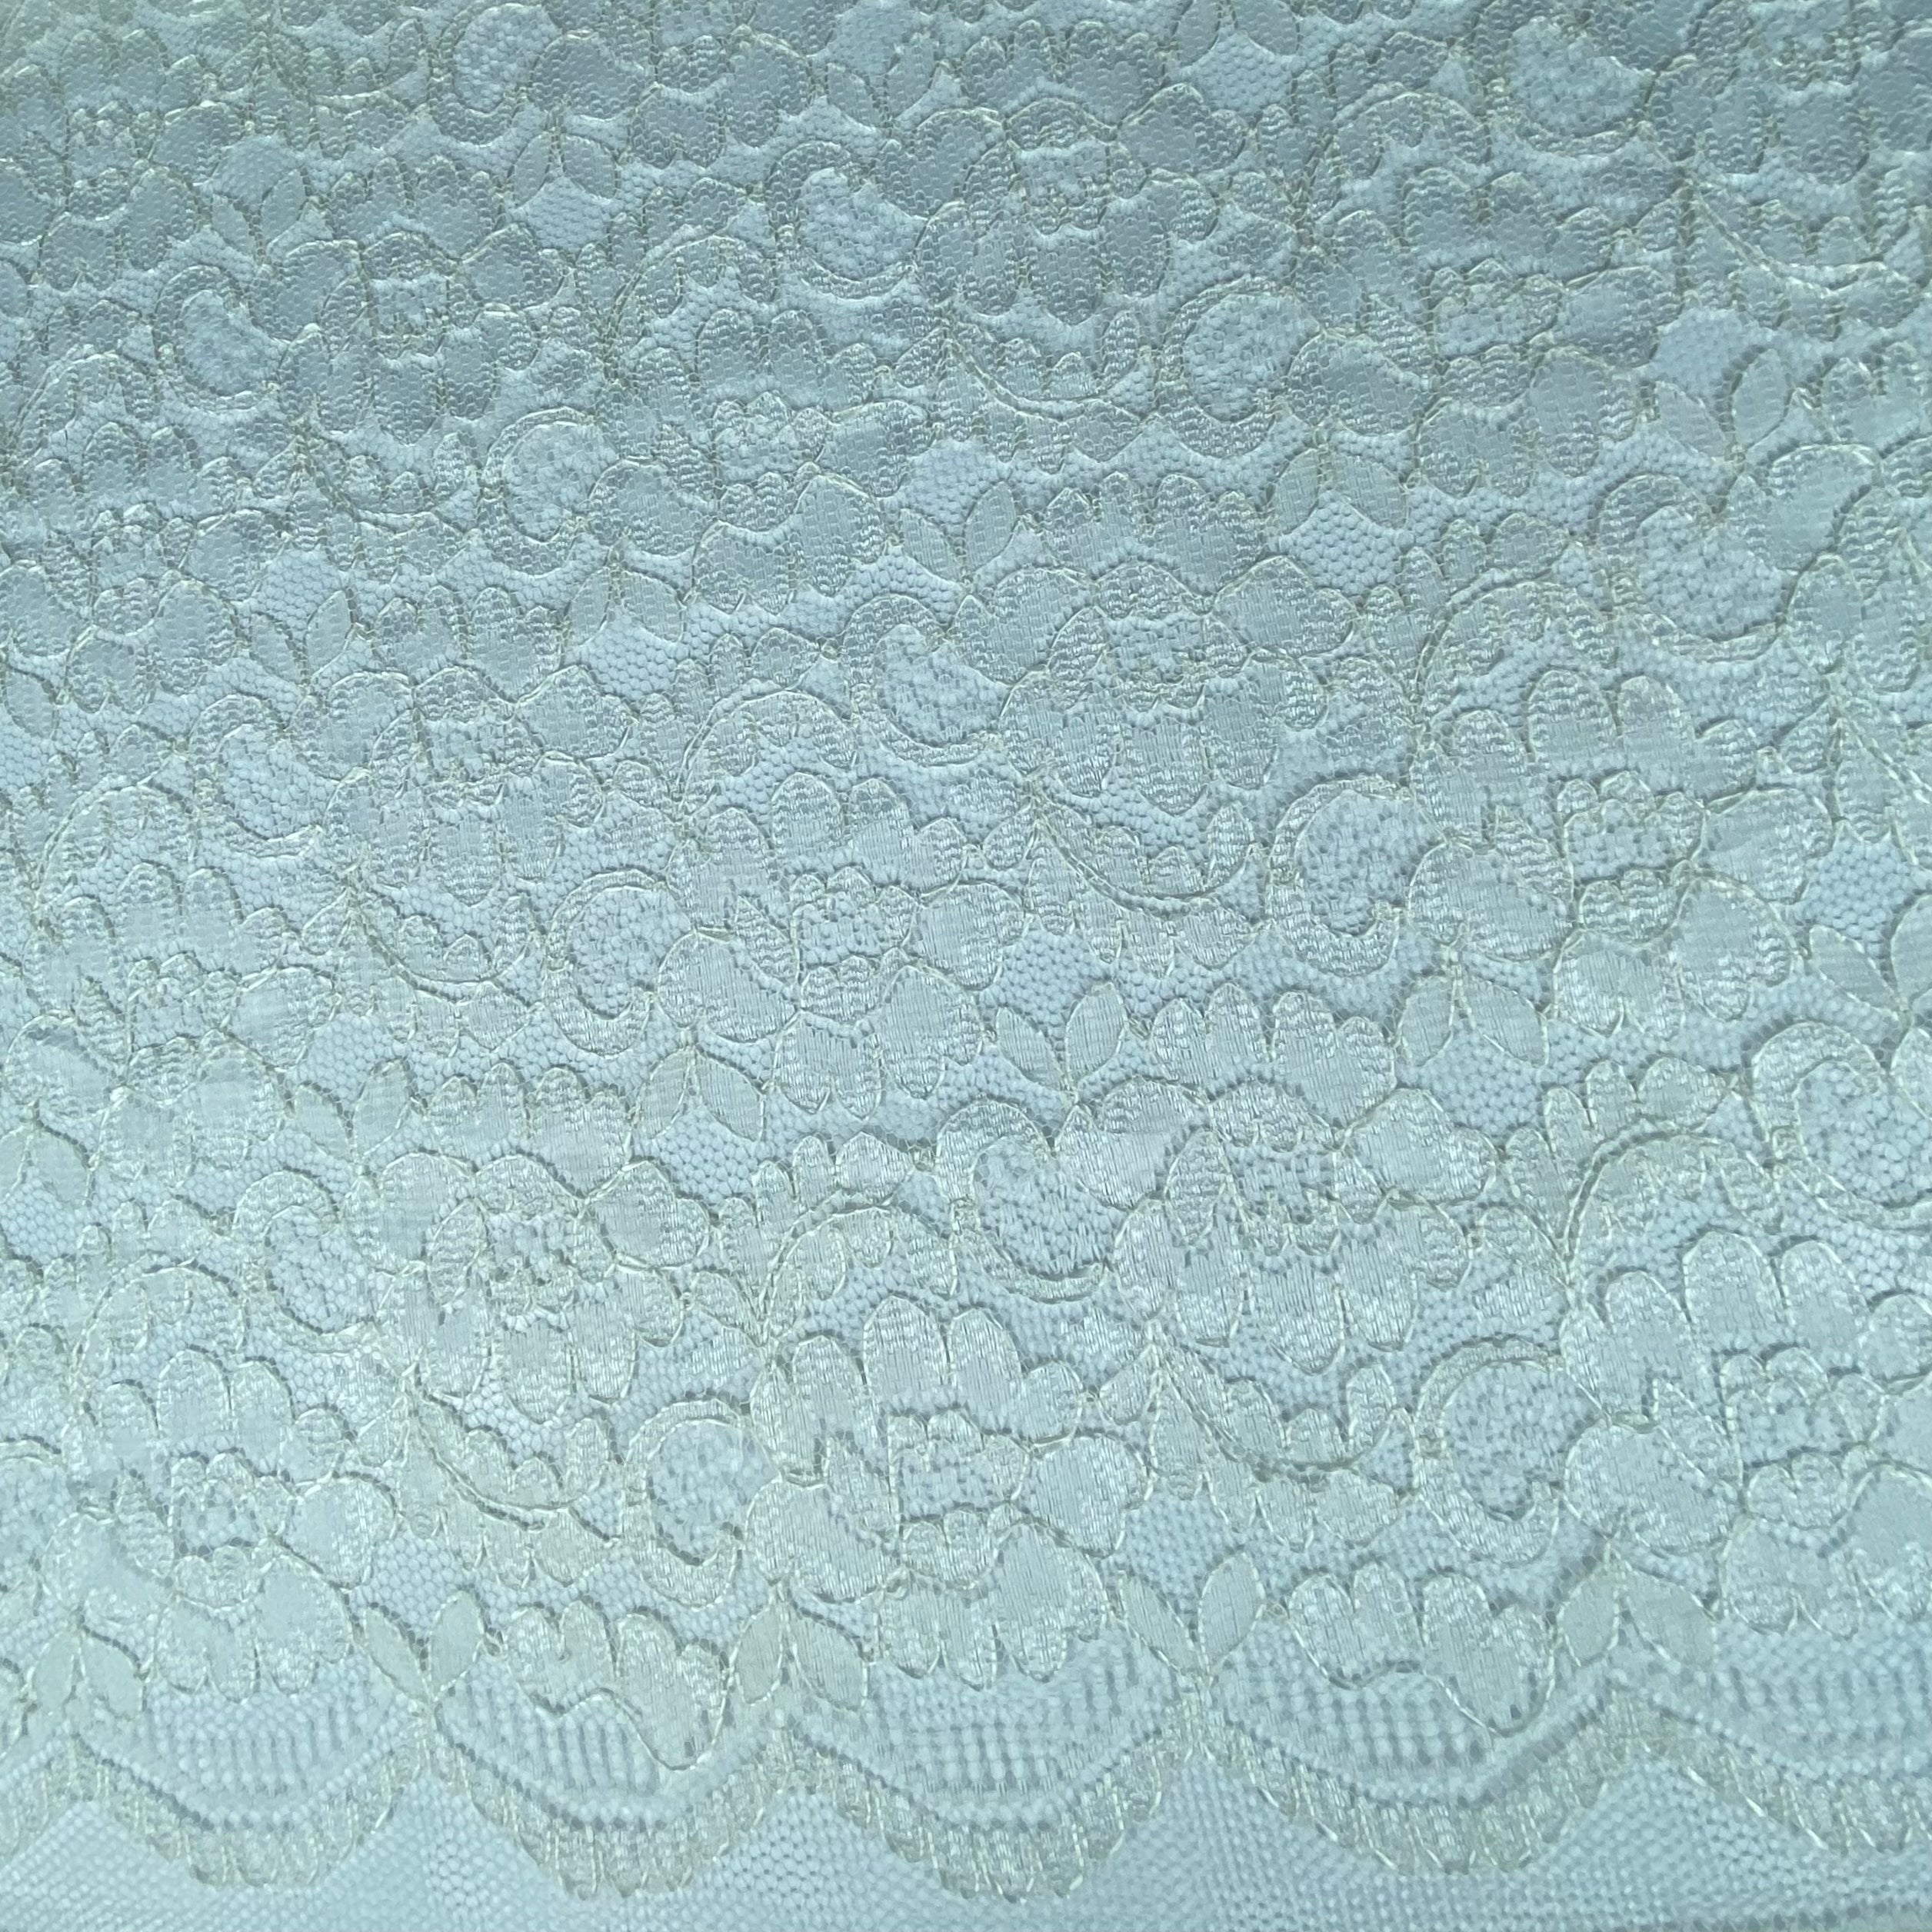 Floral Corded Lace - Remnant - Ivory